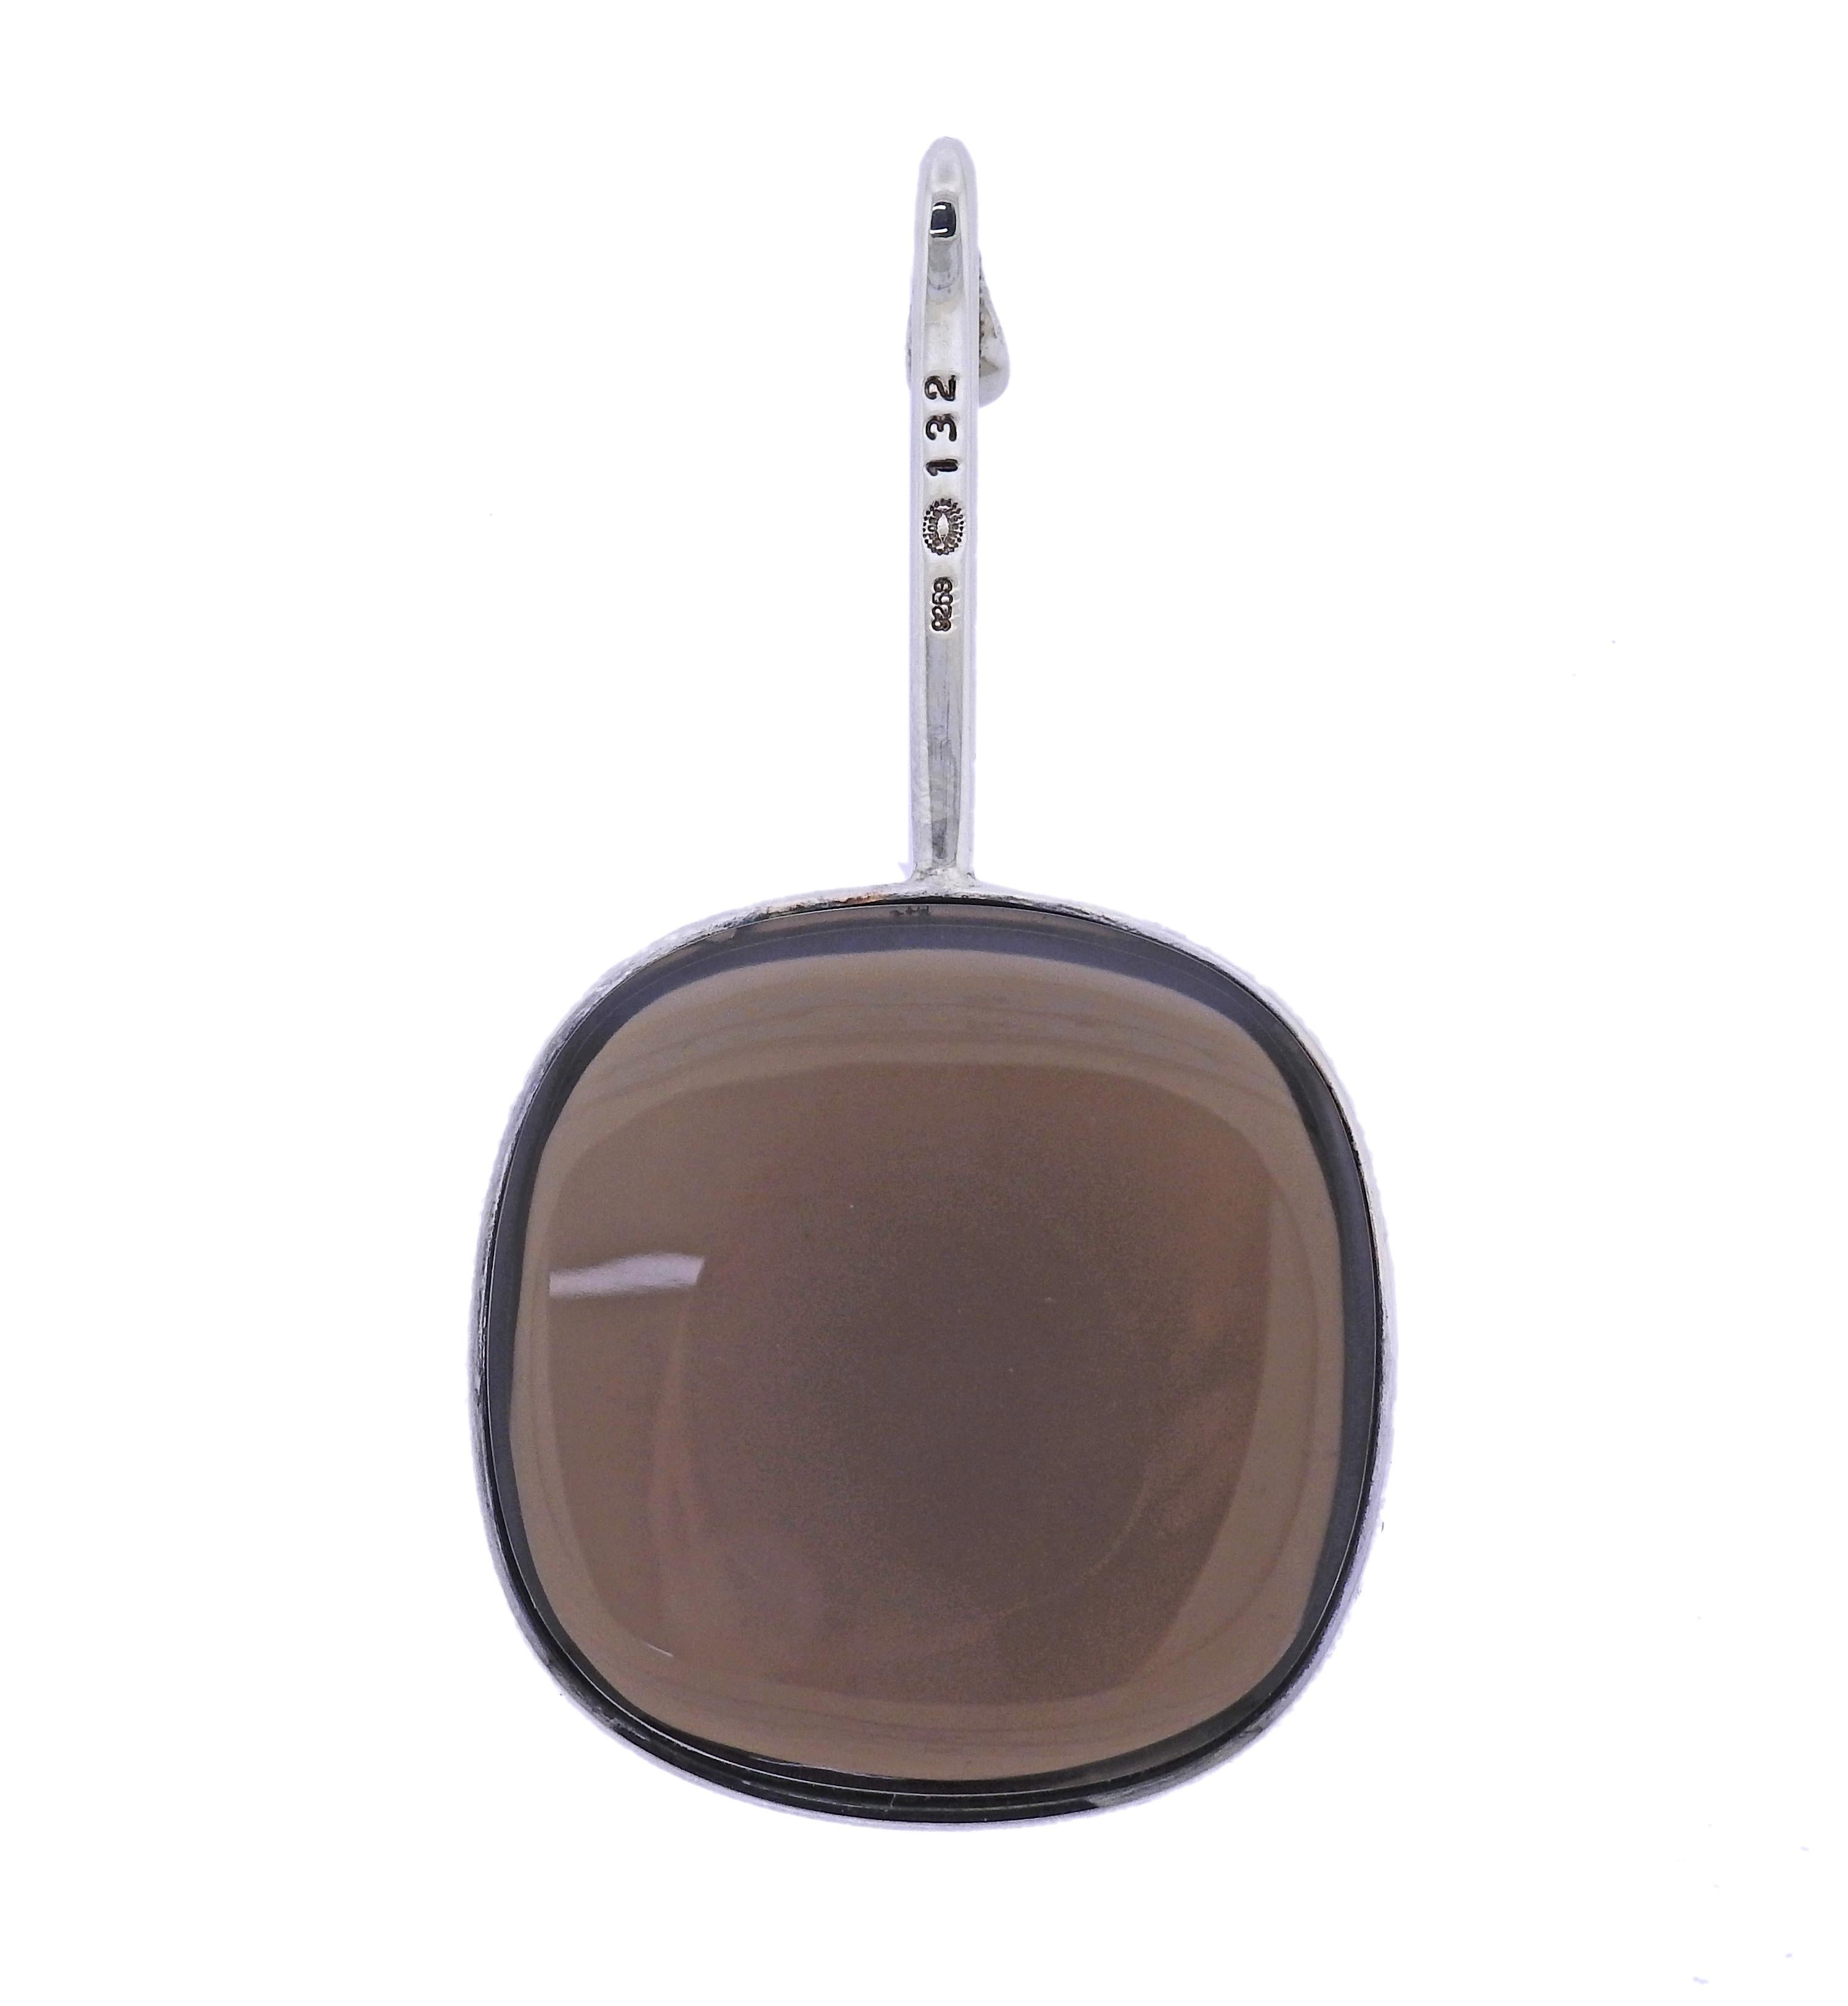 Brand new Georg Jensen sterling silver Dew Drop pendant with smokey quartz. Pendant is 65mm x 35mm *(Necklace on the model is for display purposes only*). Model # 3536446. Marked: GJ mark, 925 S, 132. Weight - 43.3 grams.